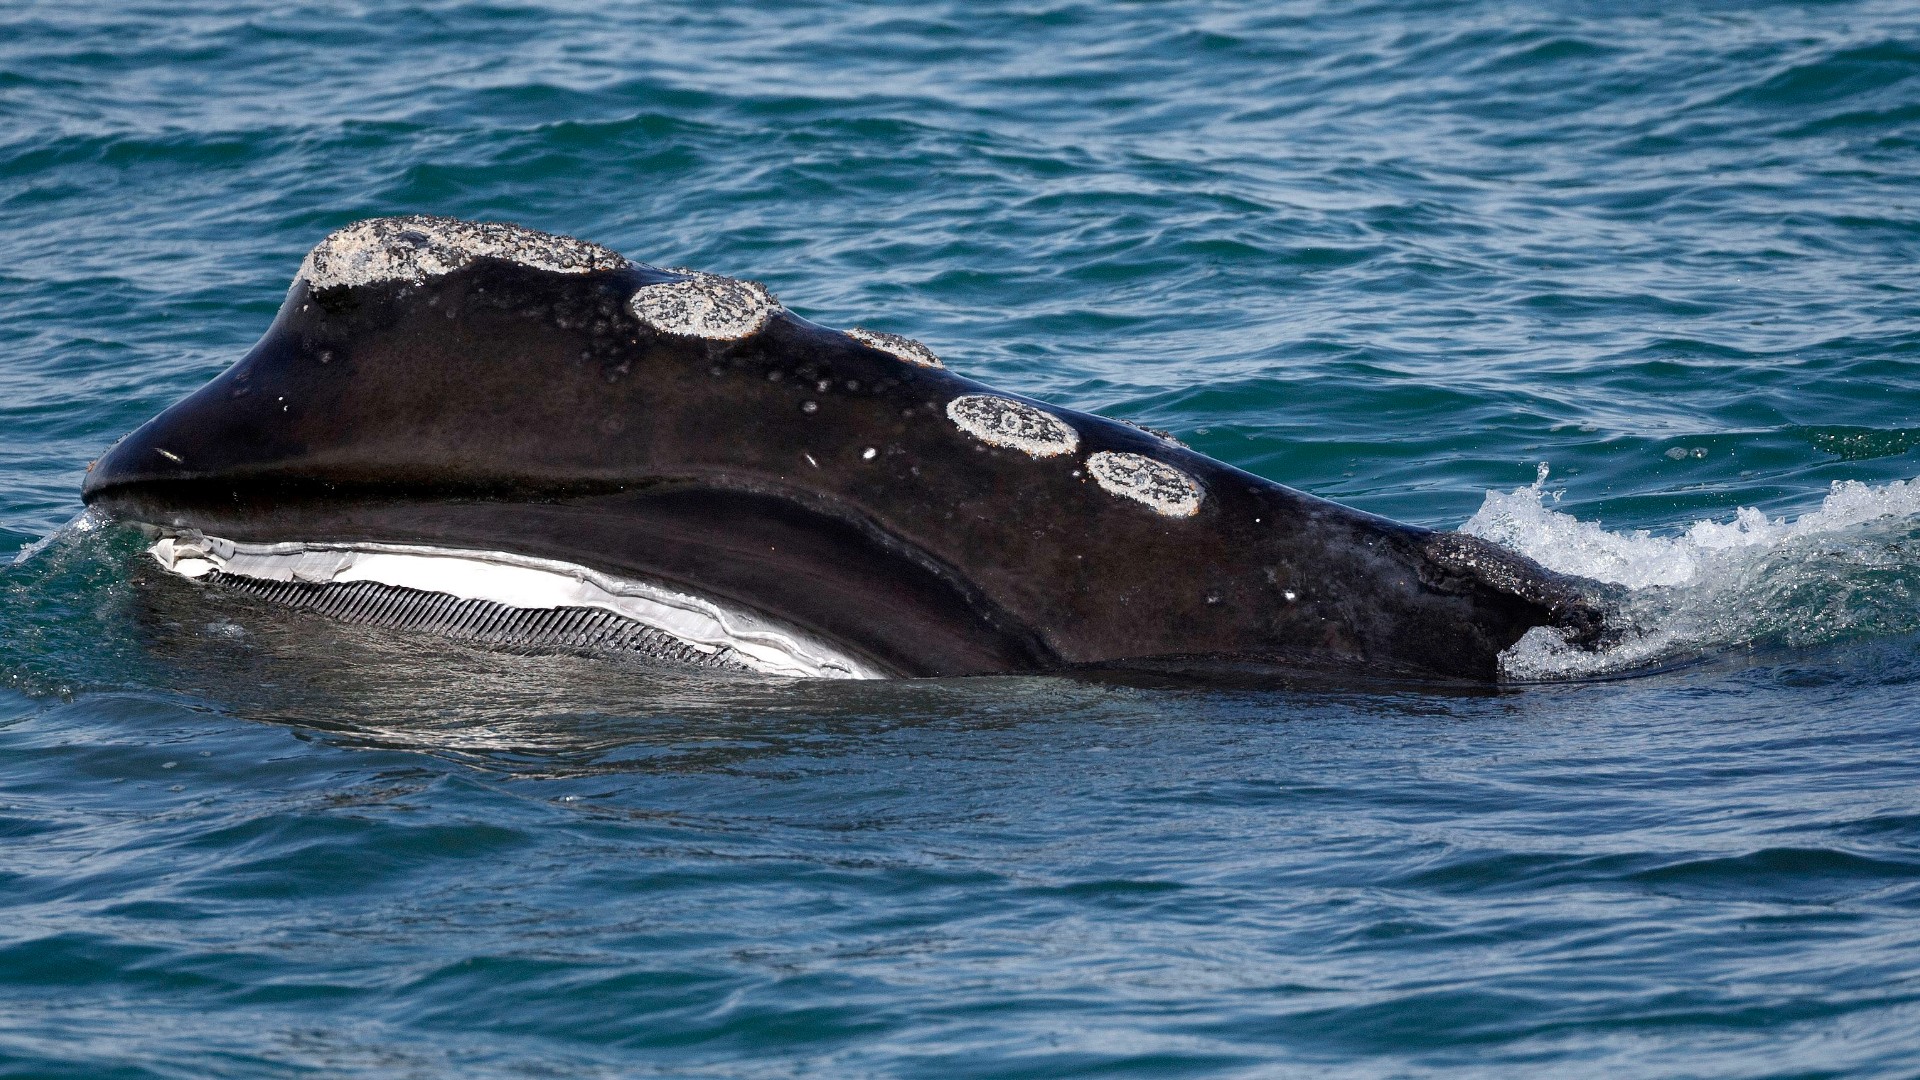 The biggest chunk, nearly $36 million, is going to monitoring and modeling efforts to track the whales.